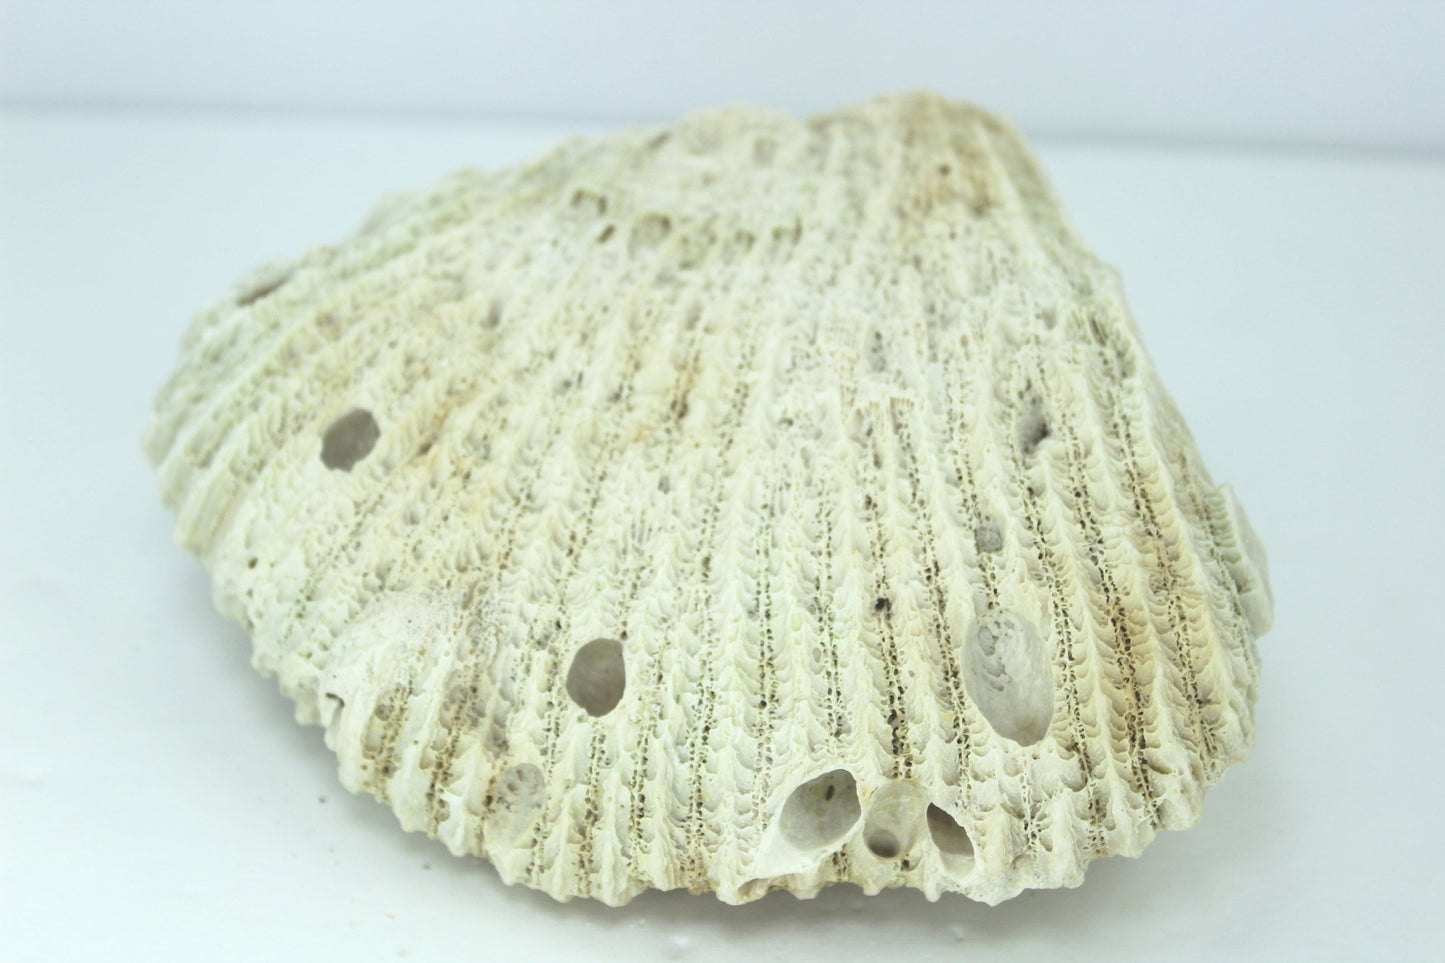 Natural Coral 5"  Block Fan  Shape 1960s Estate Collection Aquarium Shell Art Collectibles old